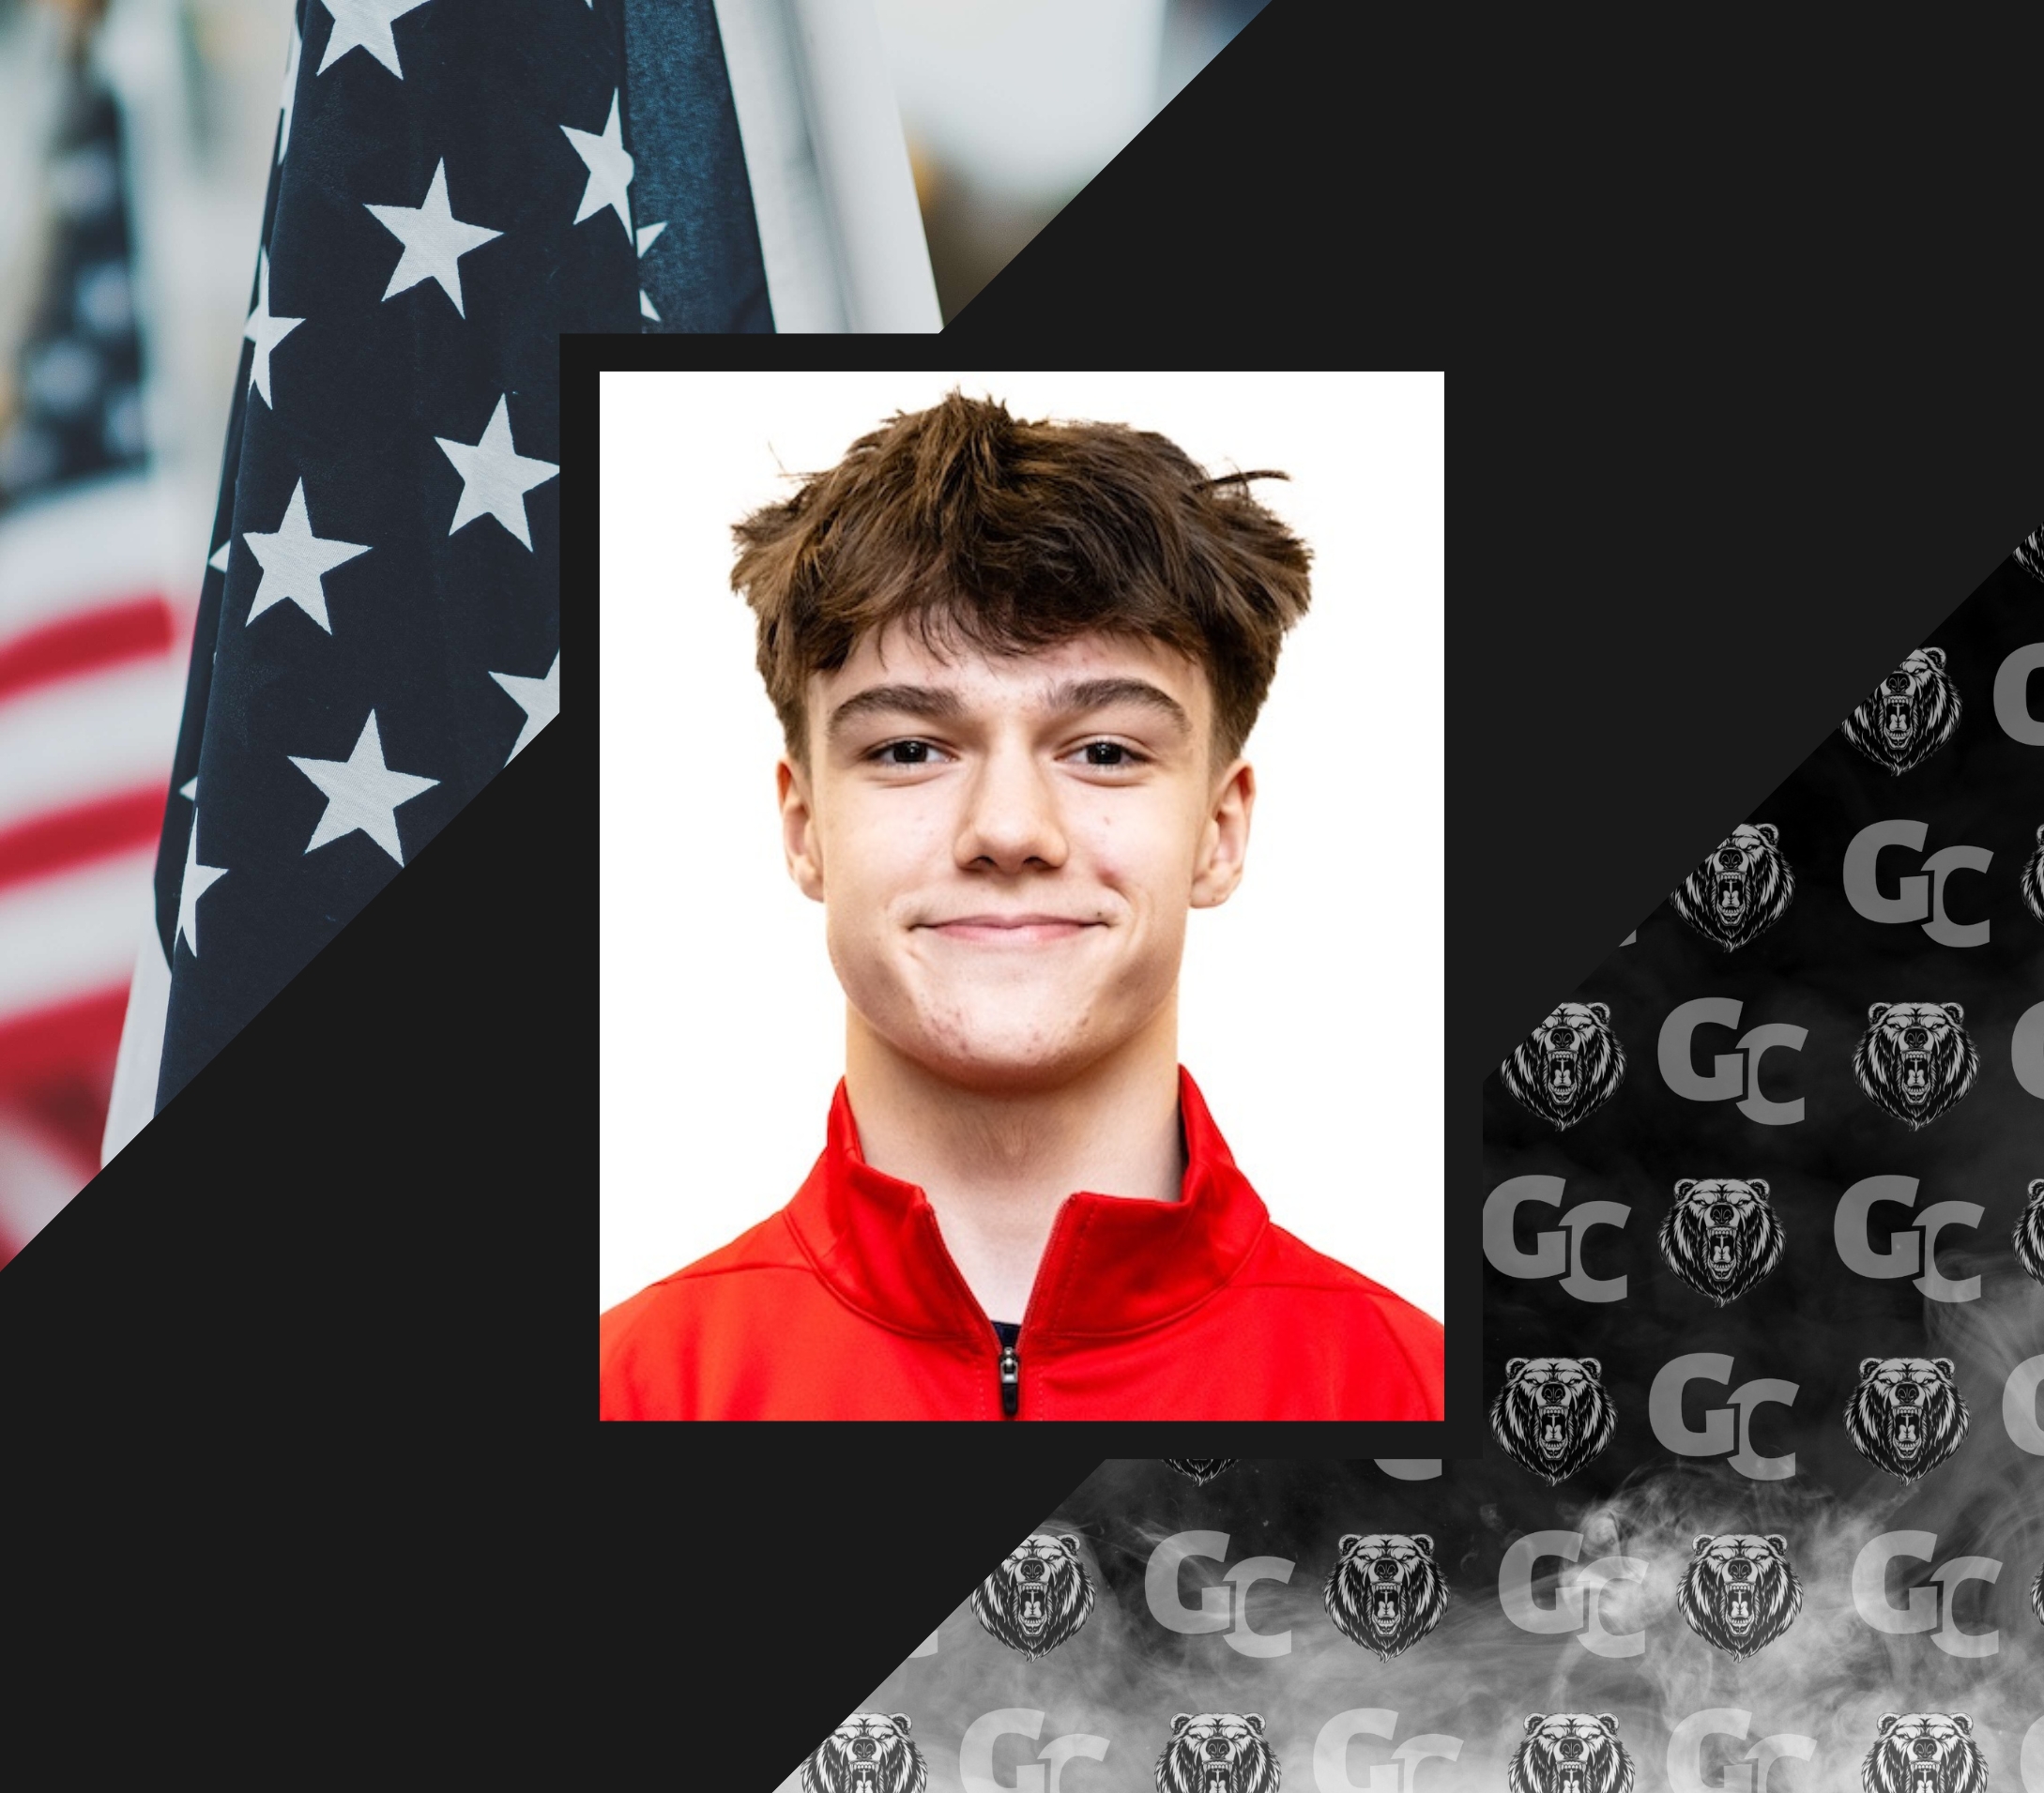 Oleksandr Shybitov is a Men's Junior Team USA athlete competing at the 2024 Grizzly Classic Canada's biggest Men's Artistic Gymnastics Event